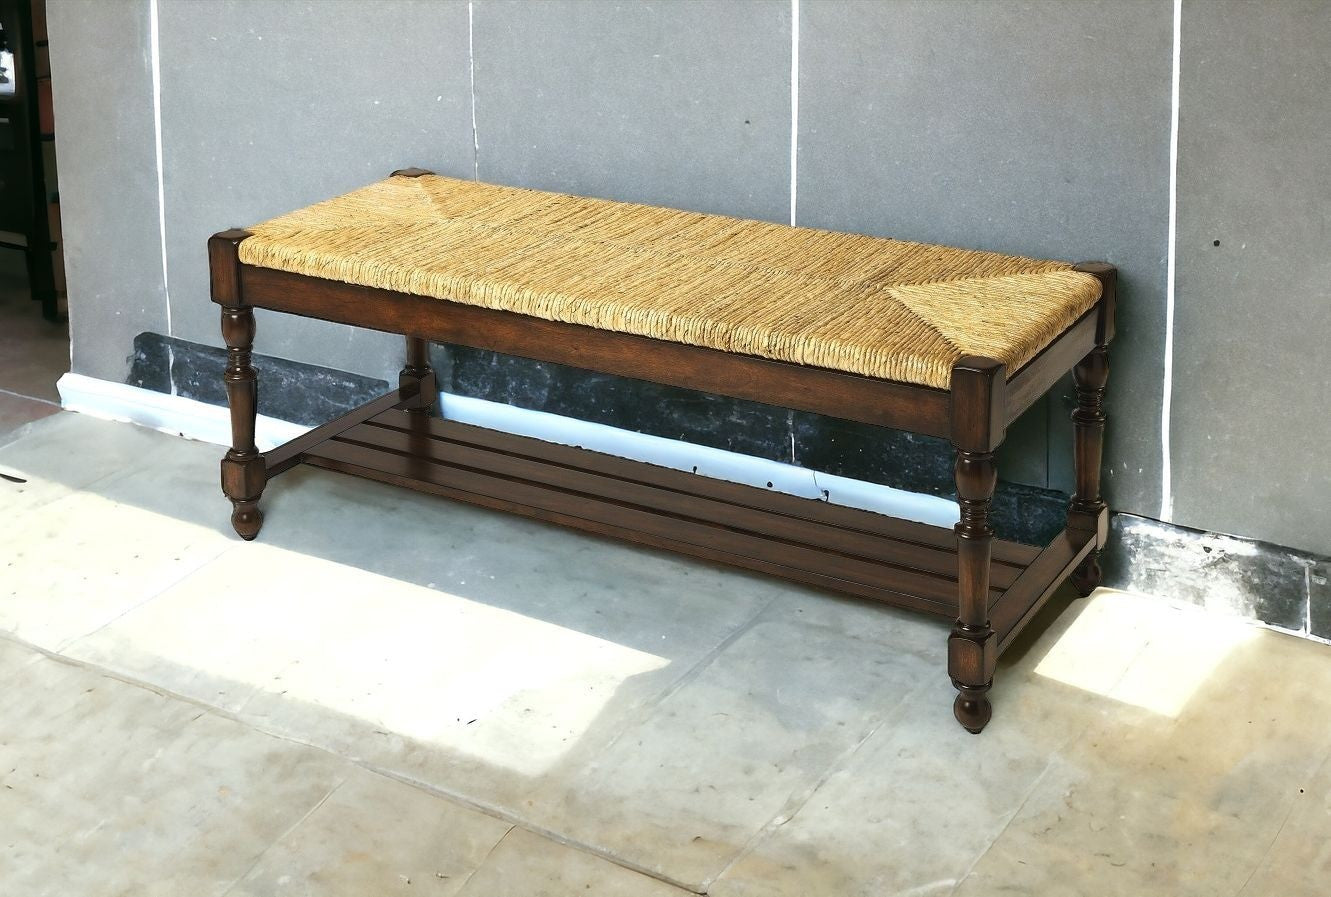 48" Natural and Brown Distressed Wicker Bench